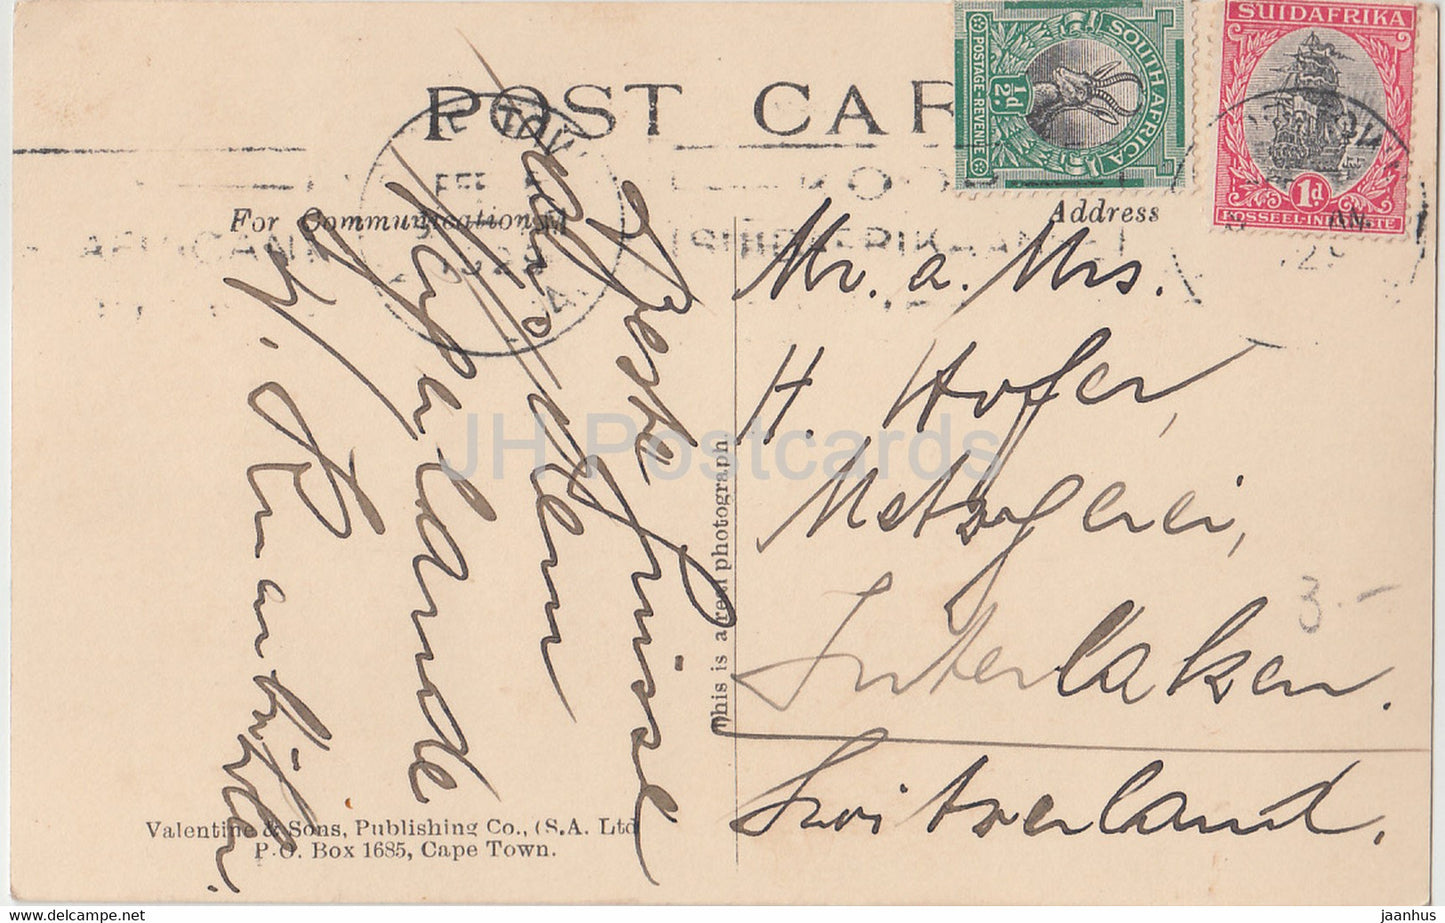 Cape Town - Post Office - Adderley - 501447 - old postcard - South Africa - used